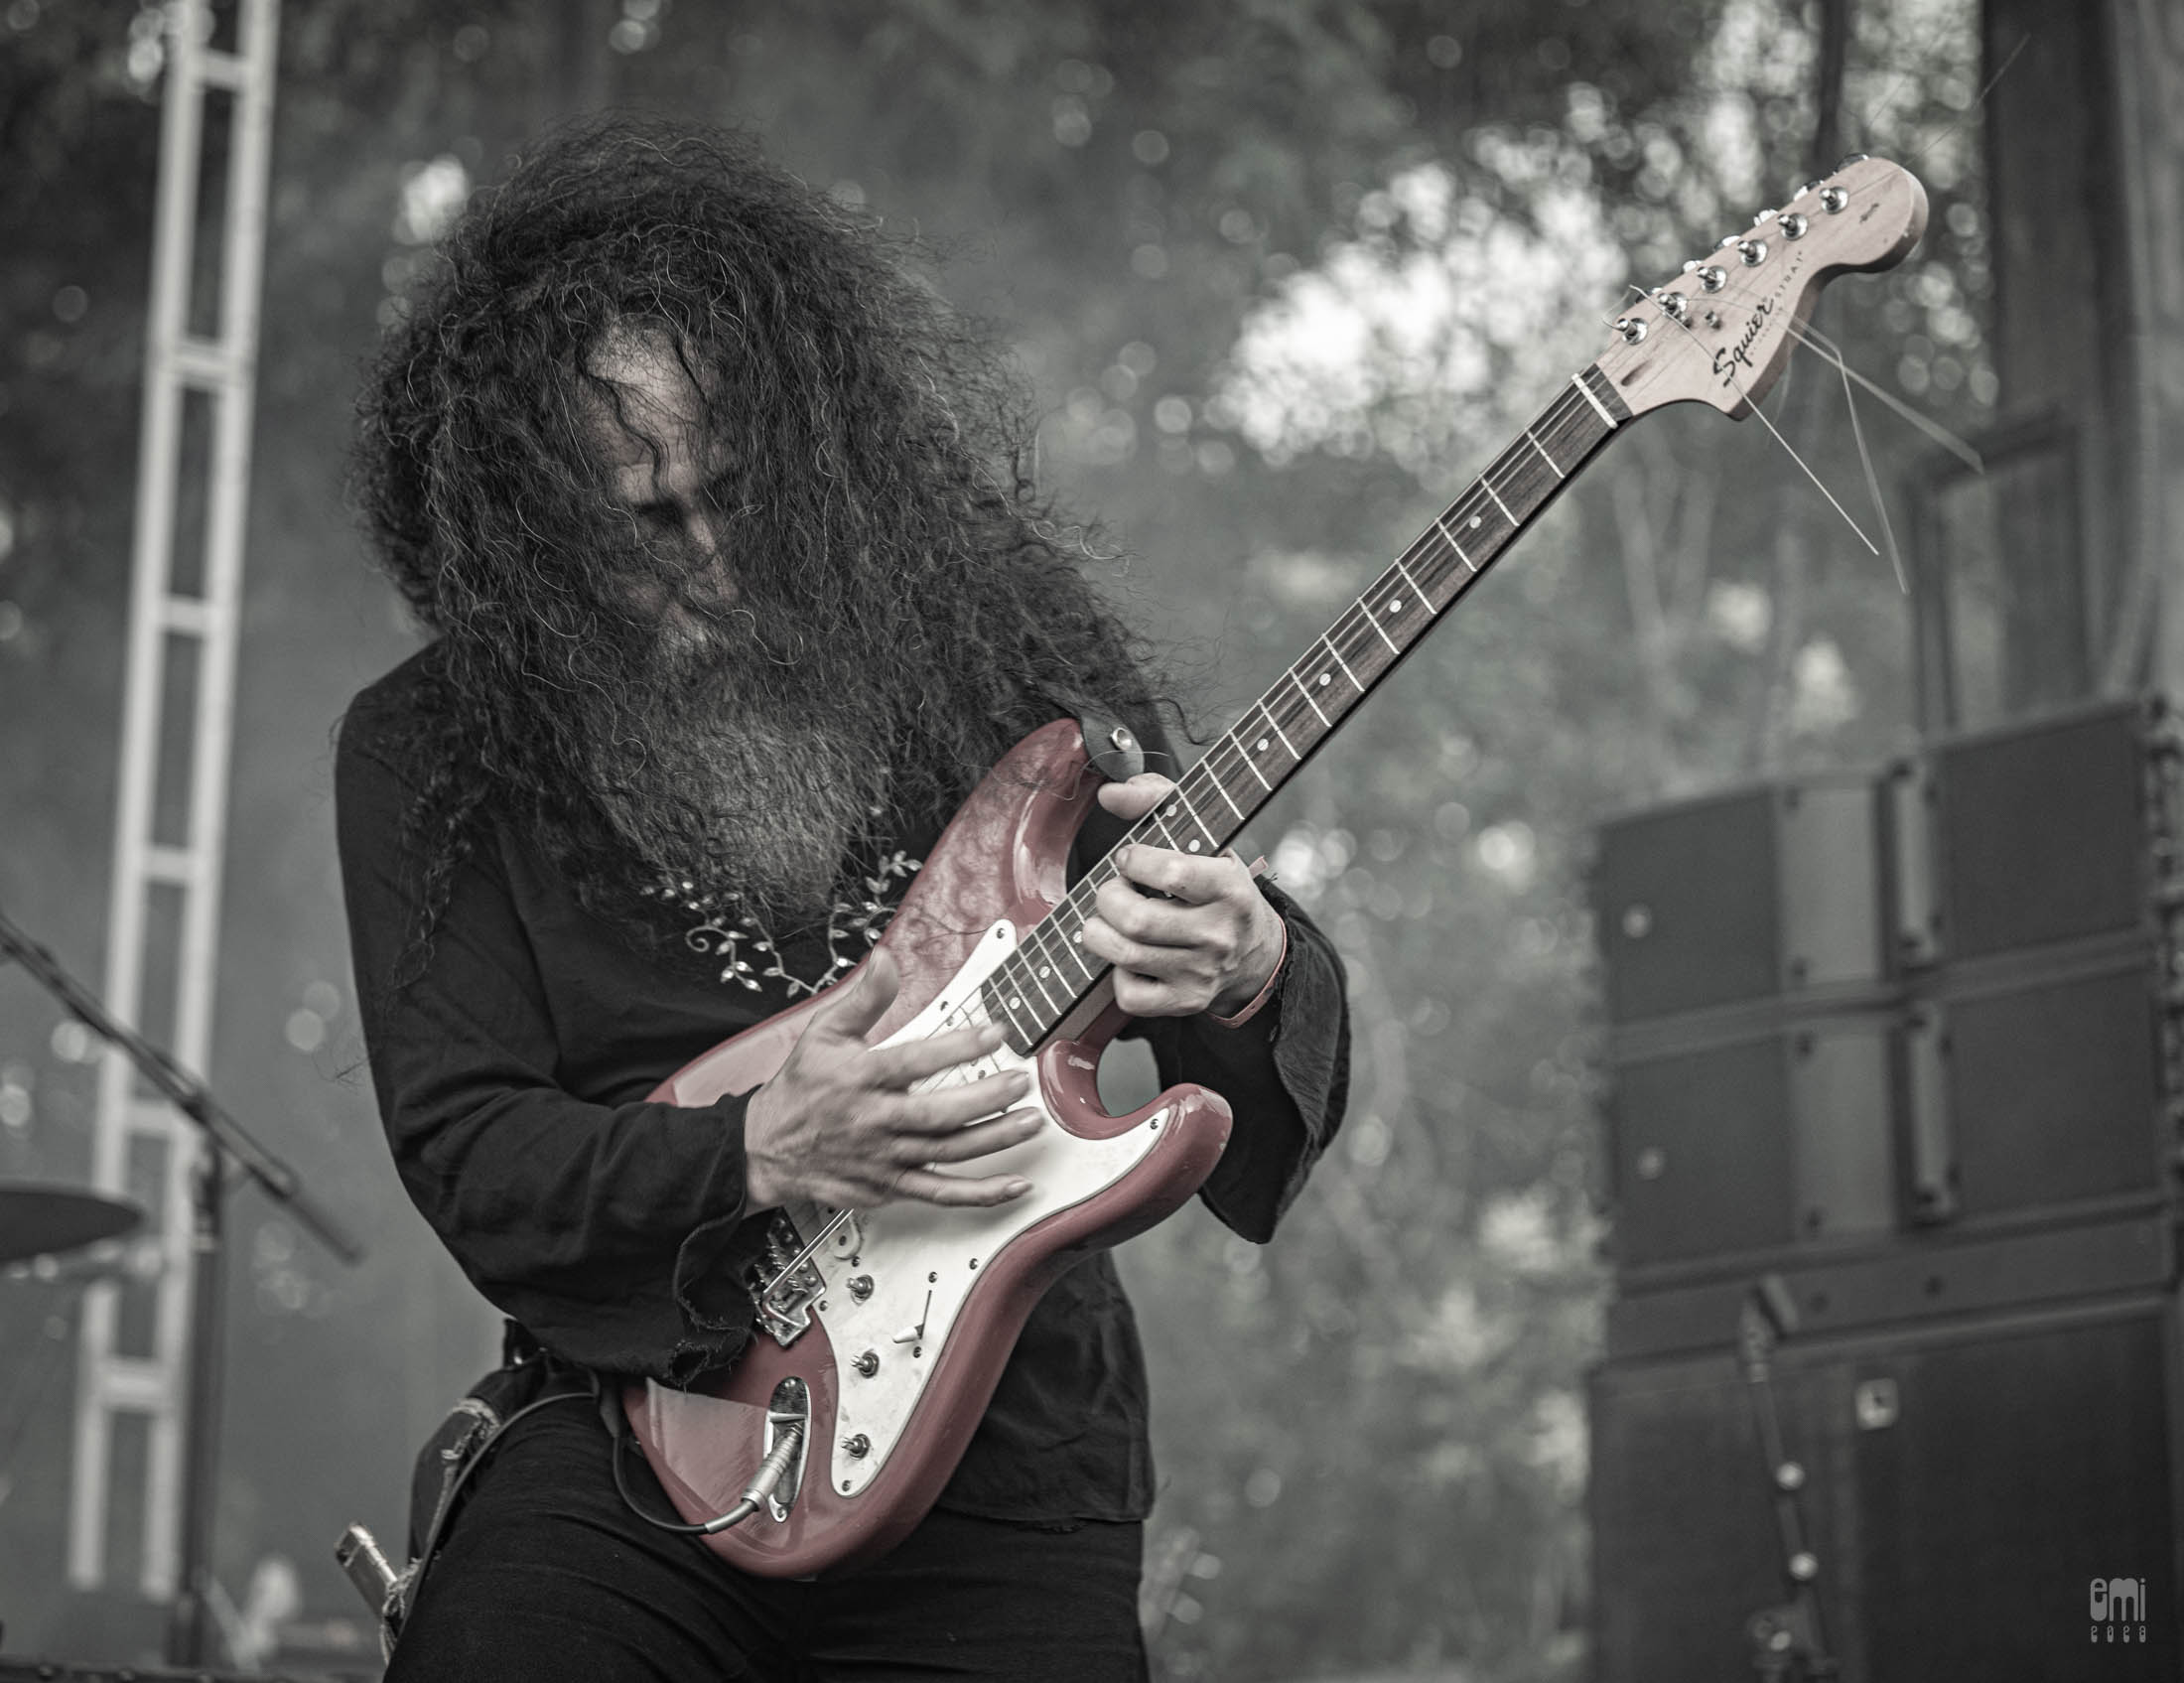 2023.4.28 ACID MOTHERS TEMPLE at AUSTIN PSYCH FEST The Far Out Lounge Austin TX. photo by emi